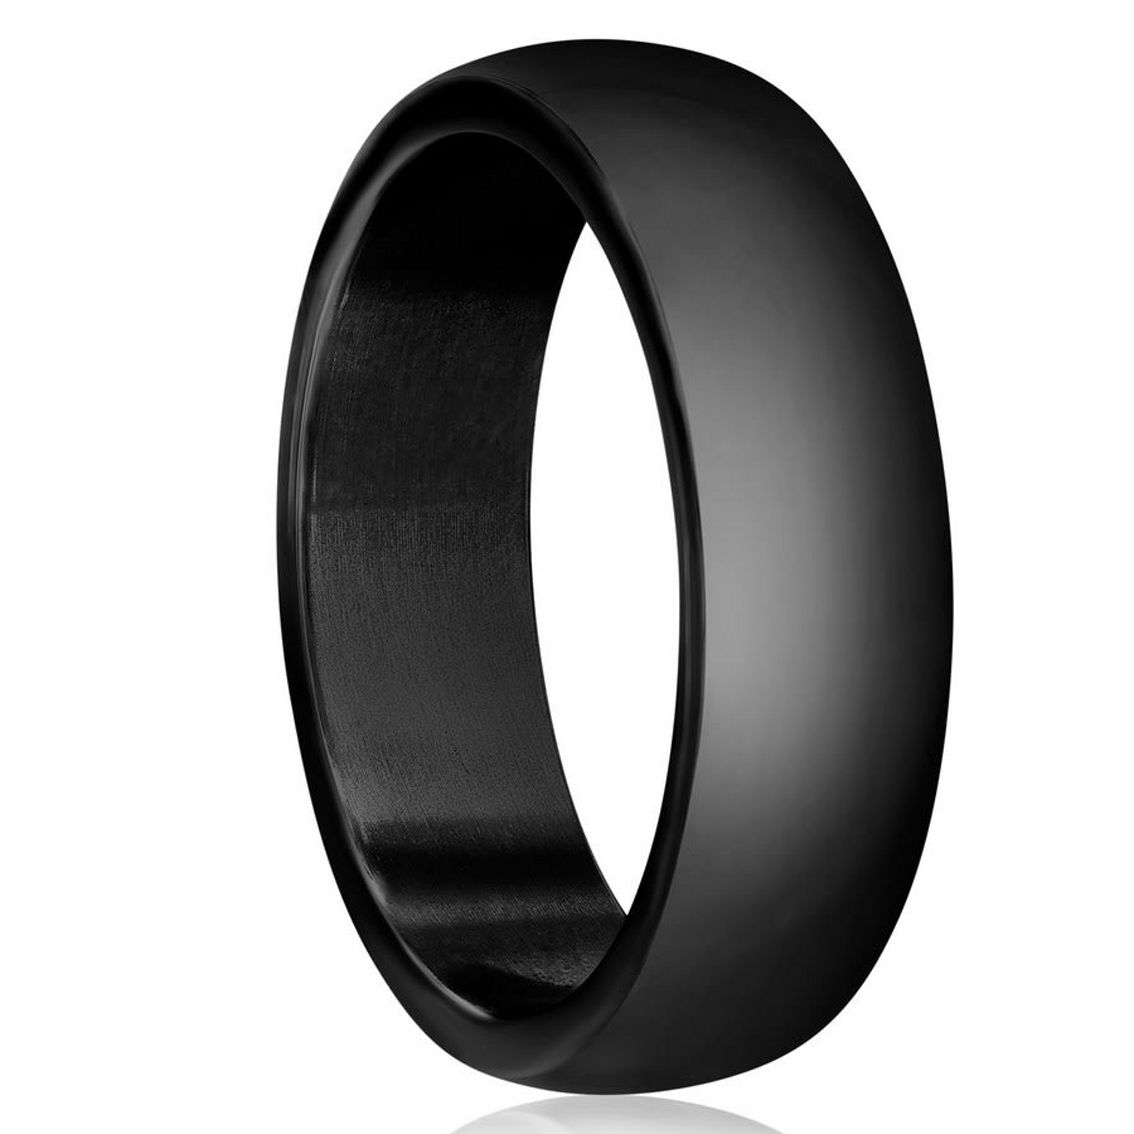 Stainless Steel 6mm Polished Ring - Black Plated - Image 2 of 3